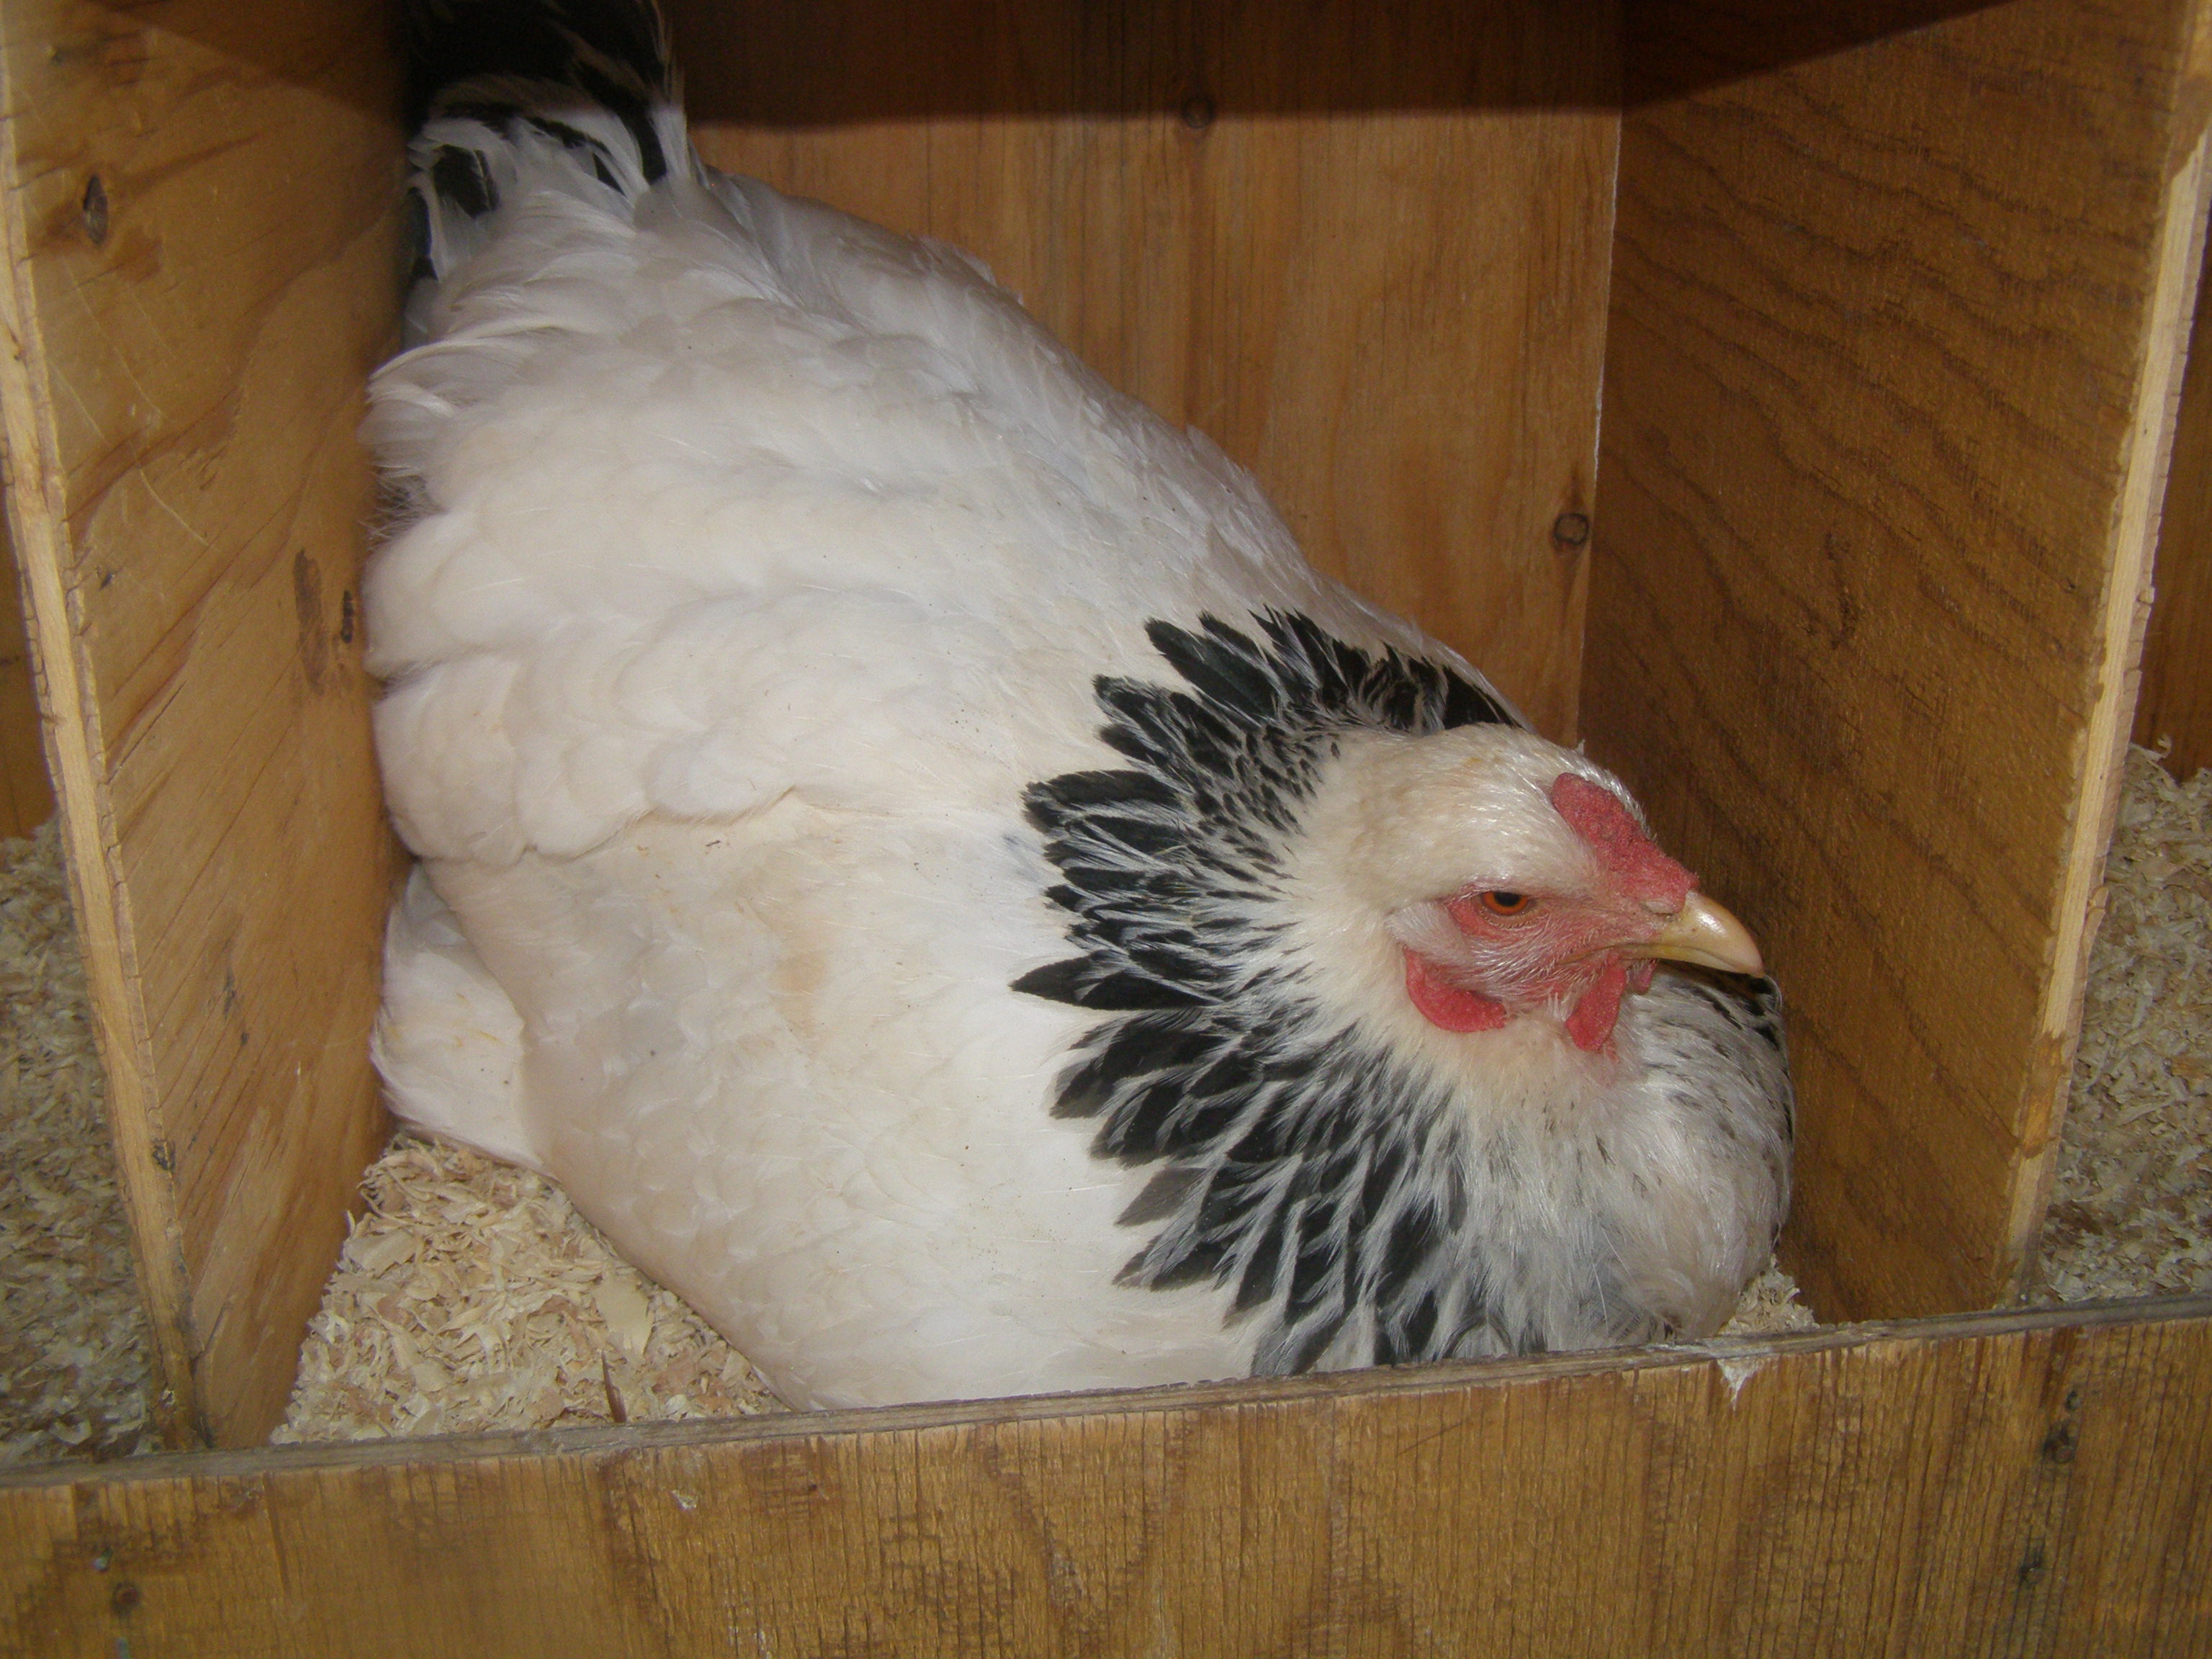 Topaz, my beautiful Brahma hen. Taken in the summer of this year. My beautiful Brahma Topaz is nesting on her eggs. I thought she was a Buff Orpington as a chick, but it turned out we bought two Brahmas from my local IFA store. It was a great blessing to get Brahmas, because these chickens love my coop and bring happiness to it! They love digging in the dirt, which is great because it keeps it aired out. I think in the future I will buy more of this breed!

She is now three years of age, the oldest hen I've had!